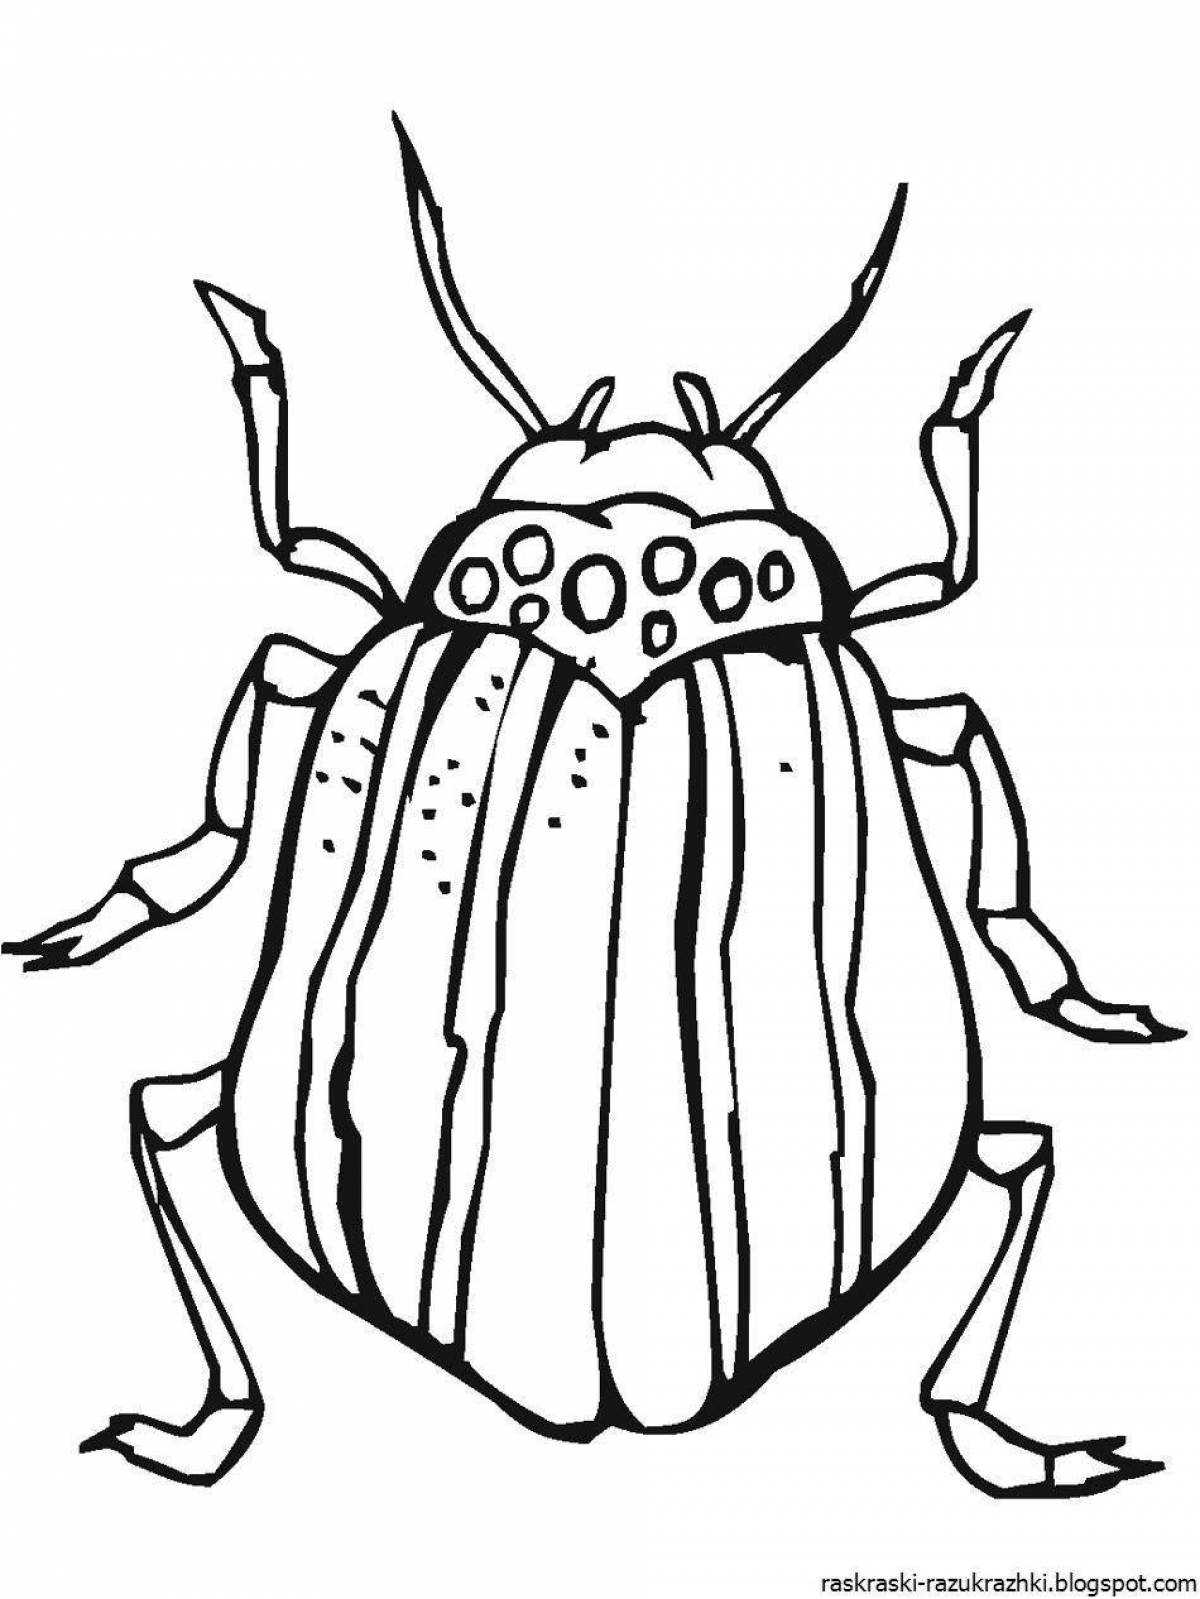 Beetle picture for kids #1